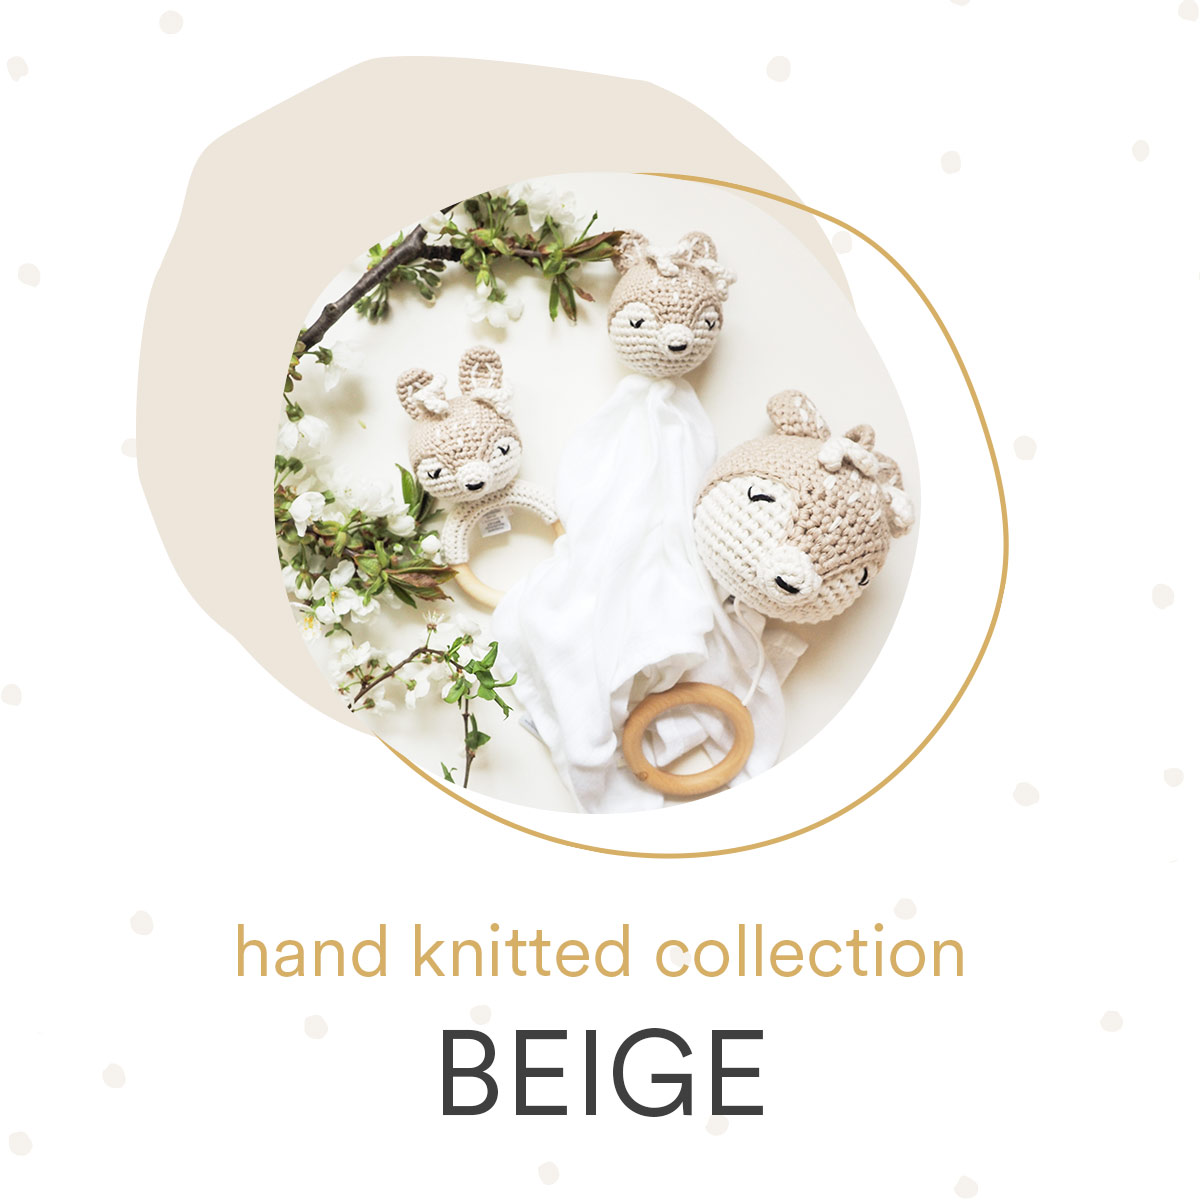 Hand knitted collection - Beige